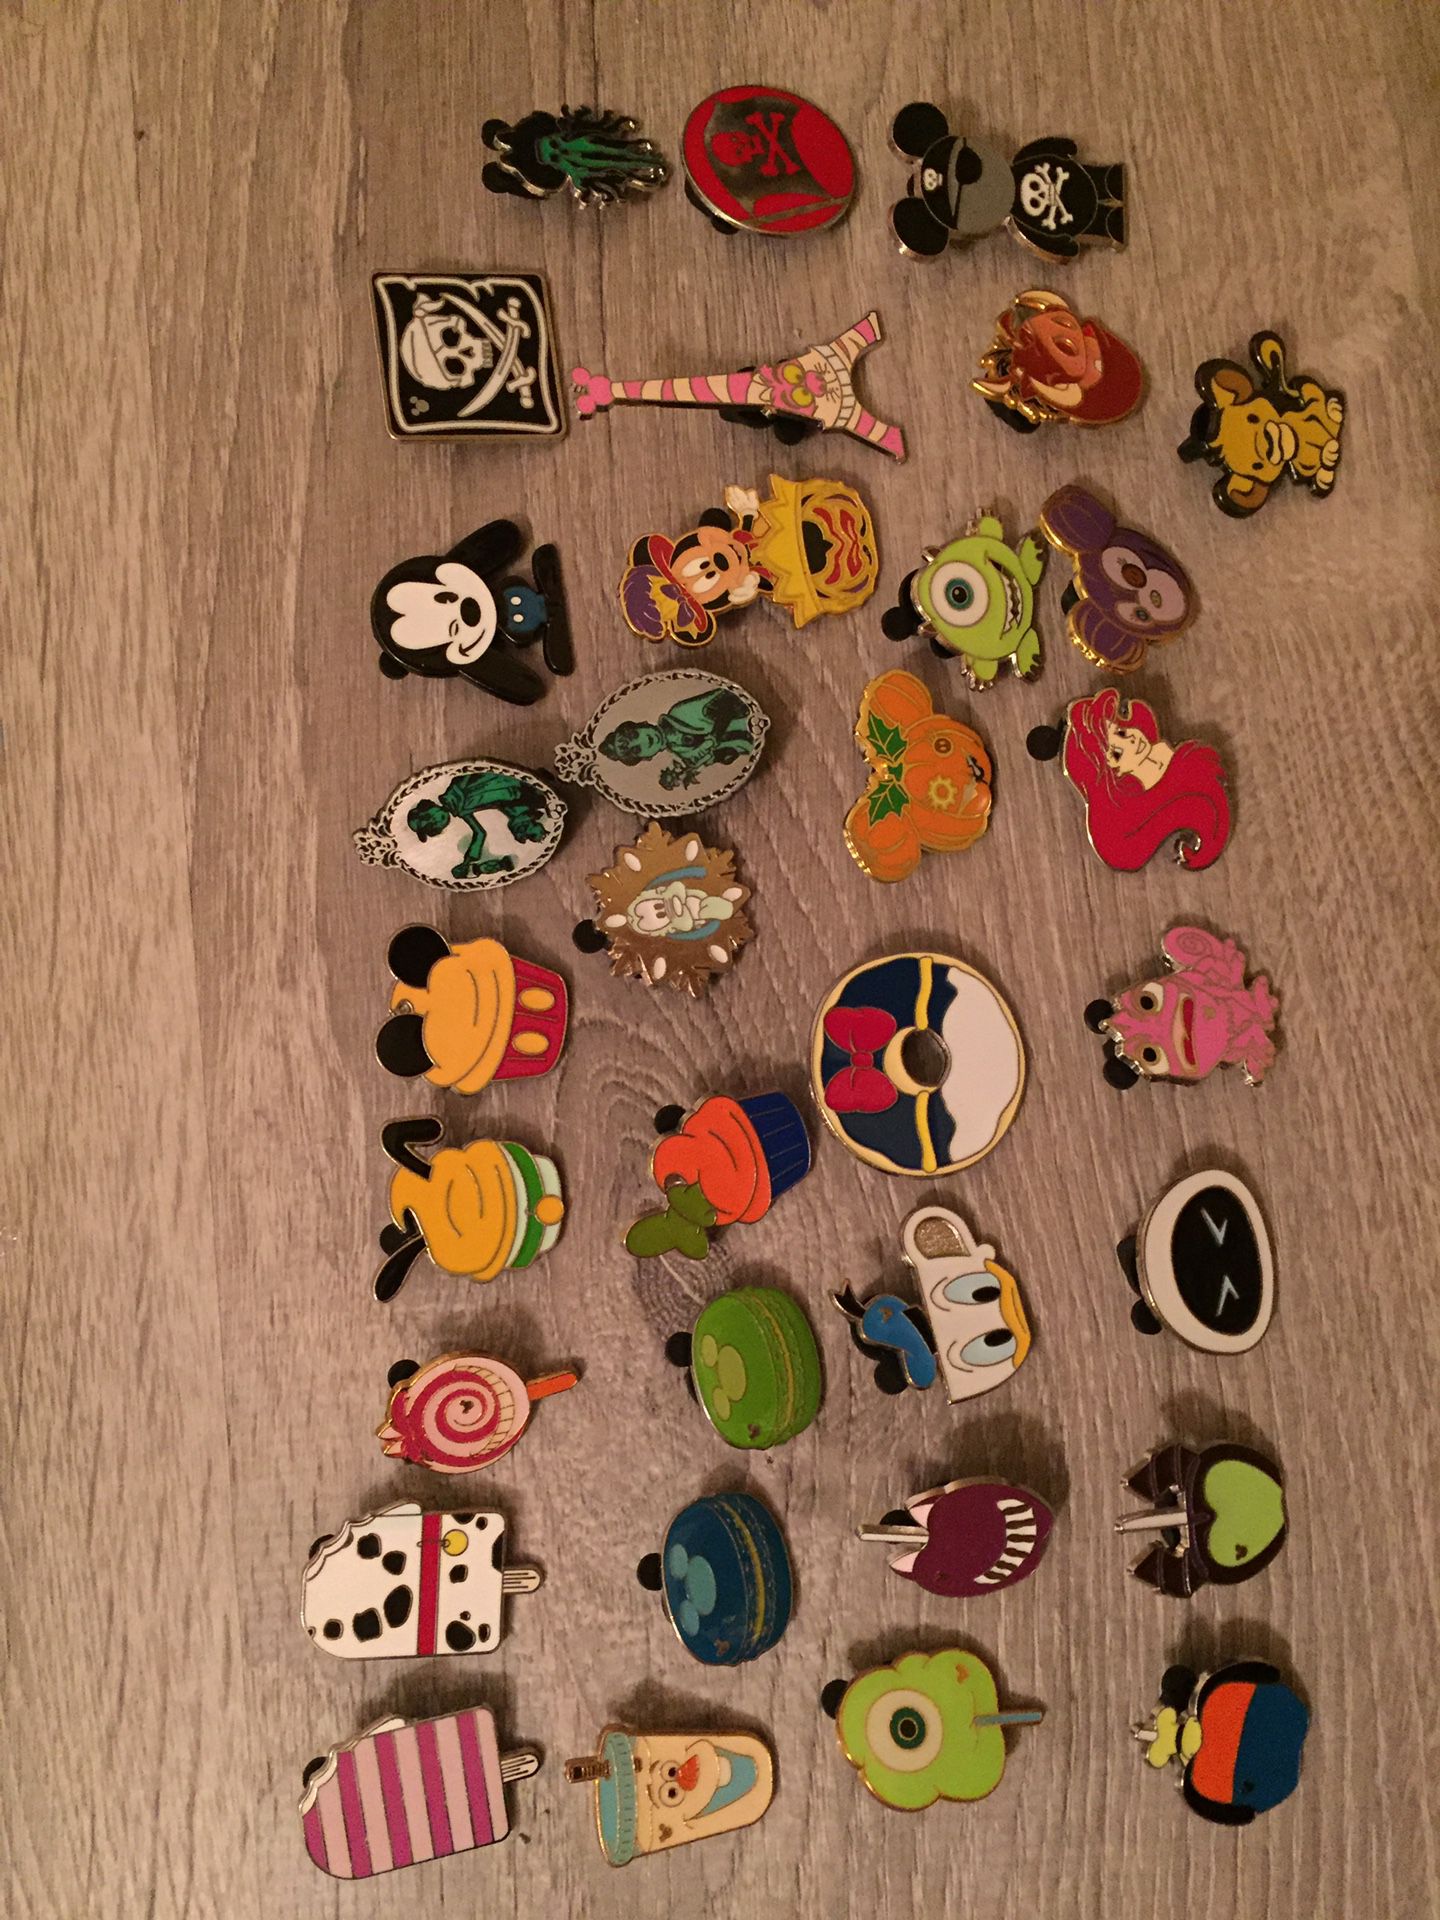 Disney Tradable pins! Pins change weekly!! Desserts, Halloween, Stitch, Star Wars and many others!! East Orlando.